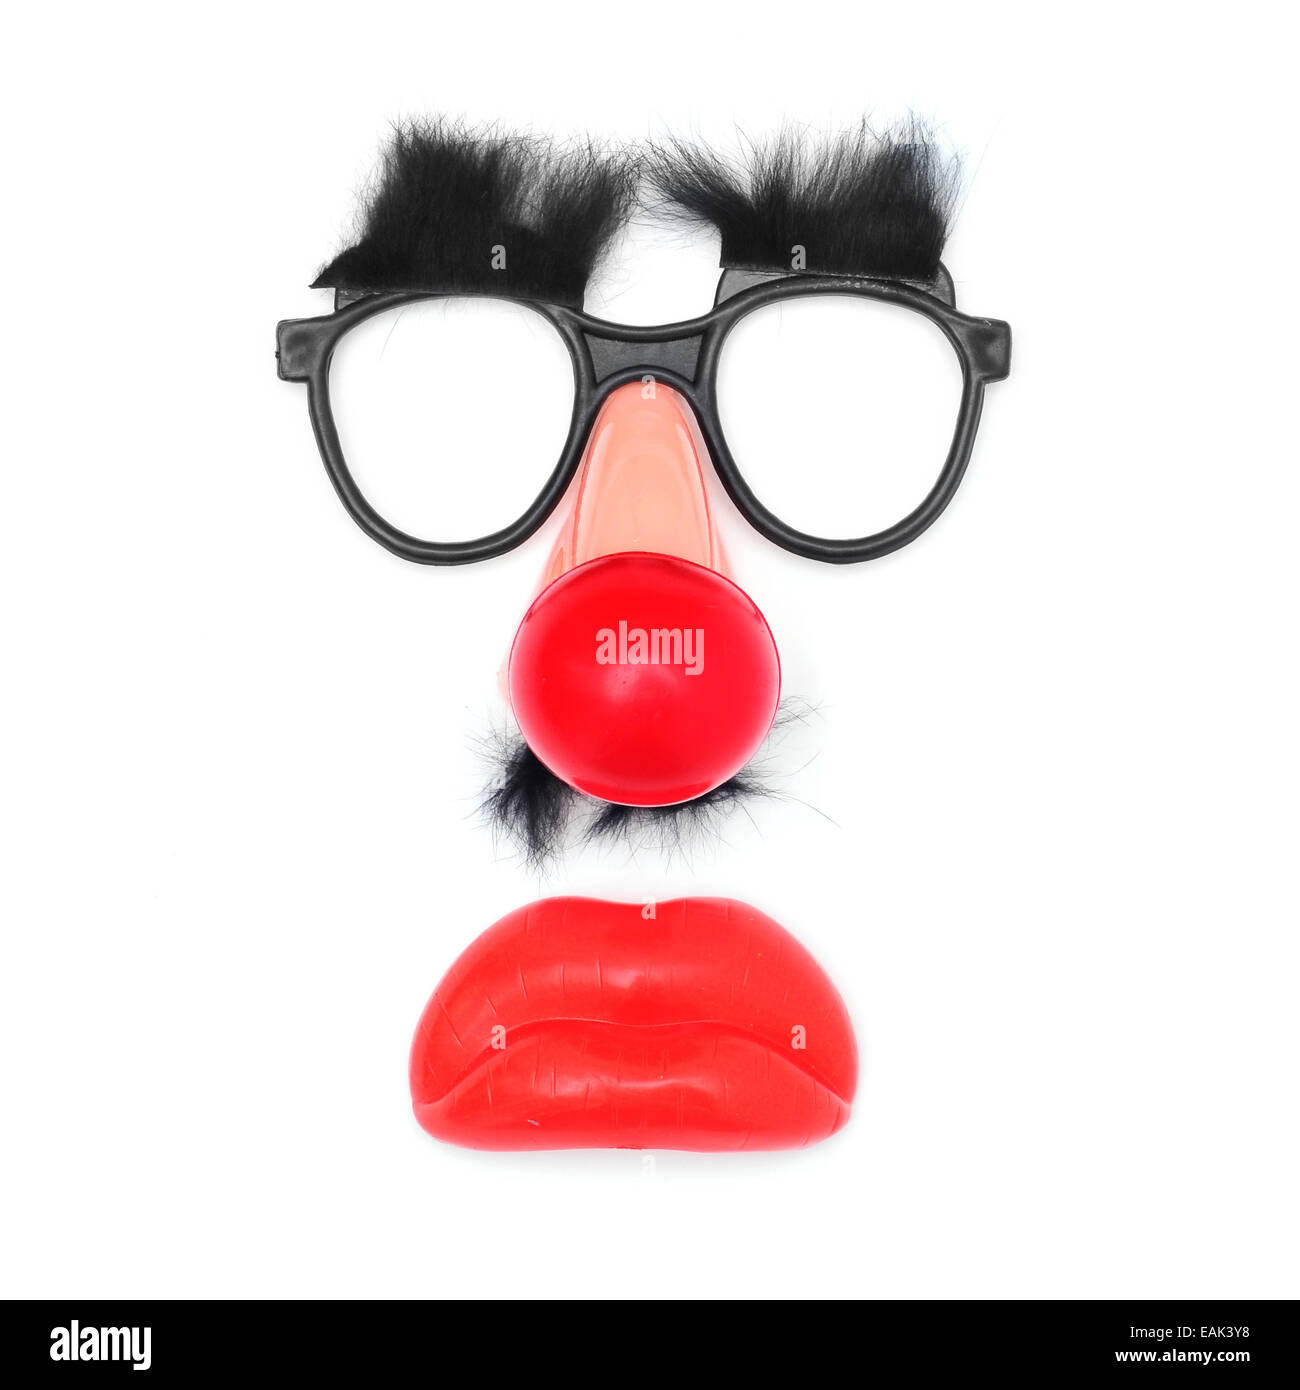 funny face: fake glasses and eyebrows, clown nose, mustache and mouth on a white background Stock Photo